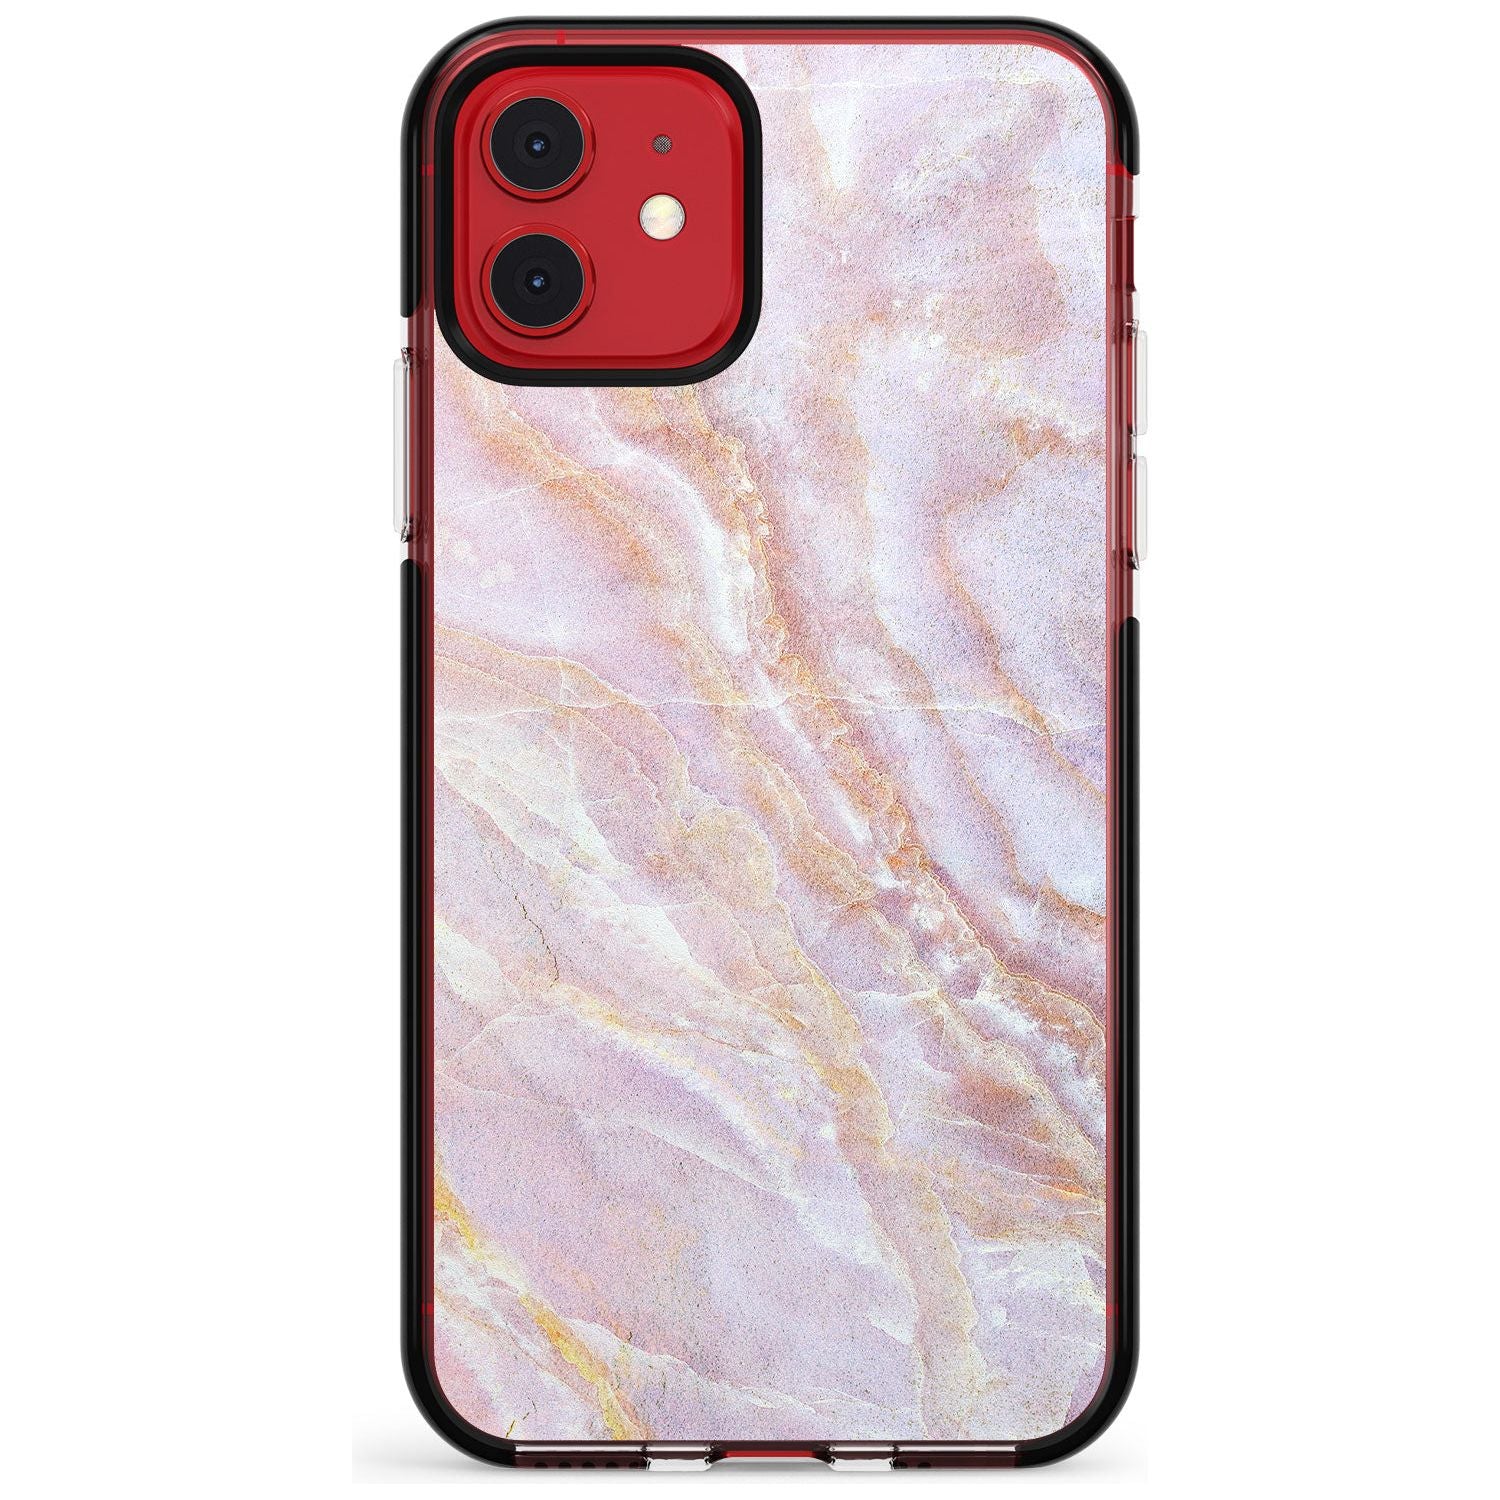 Soft Pink & Yellow Onyx Marble Texture Pink Fade Impact Phone Case for iPhone 11 Pro Max